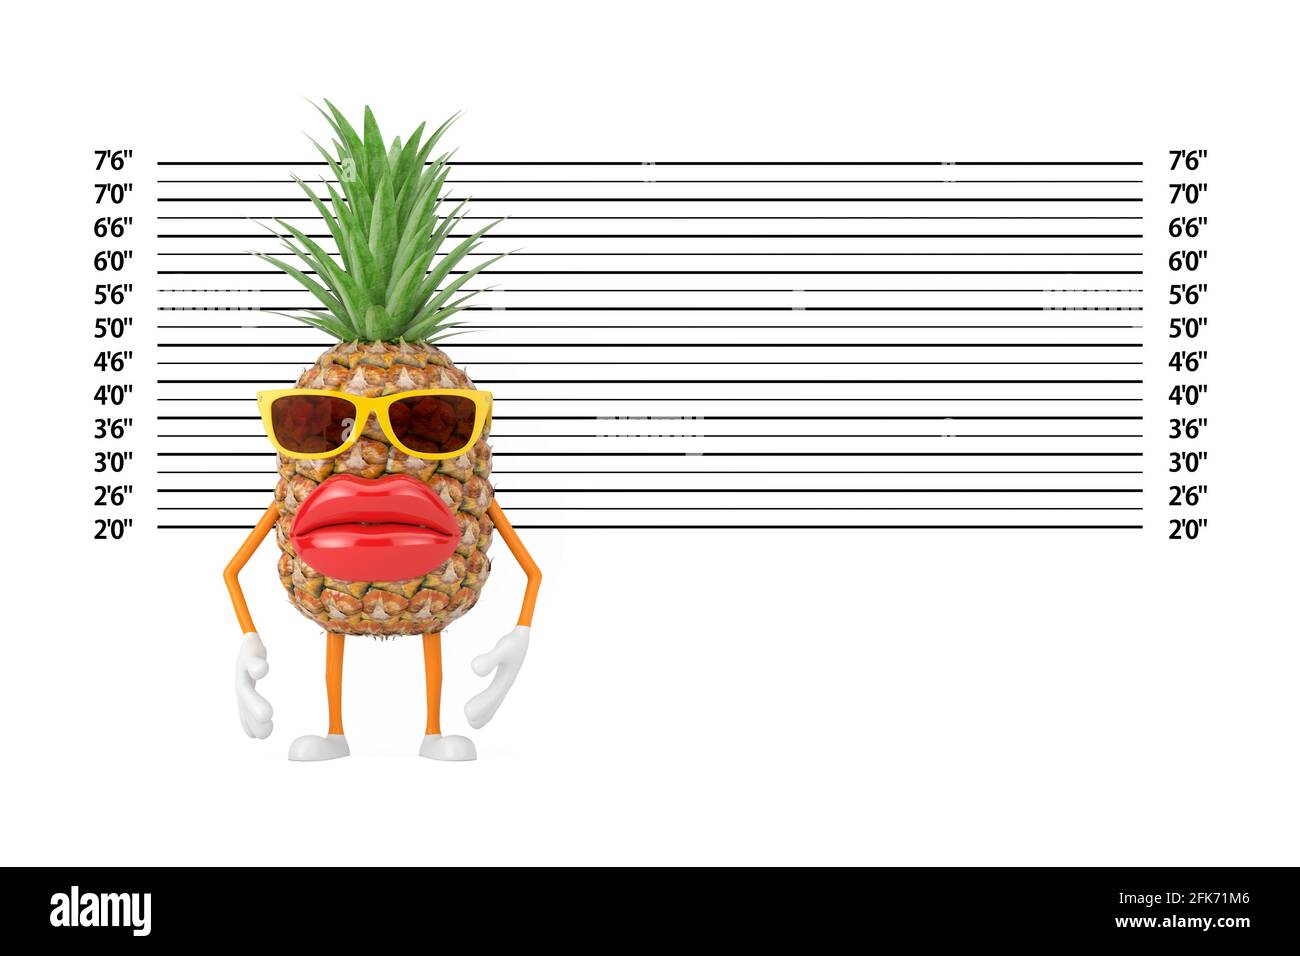 Fun Cartoon Fashion Hipster Cut Pineapple Person Character Mascot in front of Police Lineup or Mugshot Background extreme closeup. 3d Rendering Stock Photo